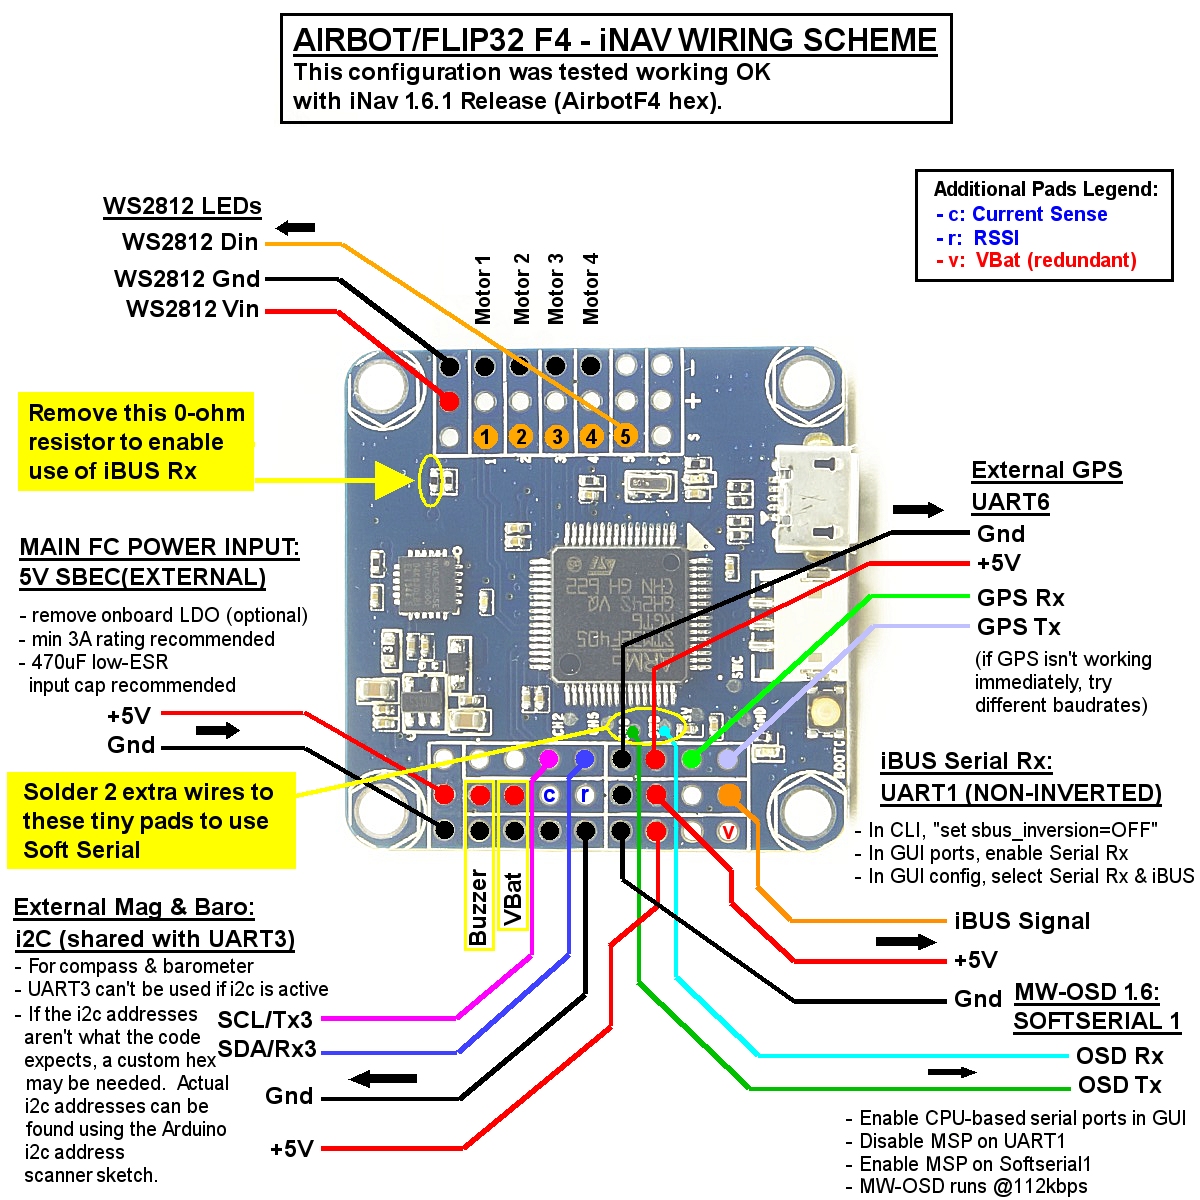 a9950281-247-AirbotF4acro-iNav-Wiring_01